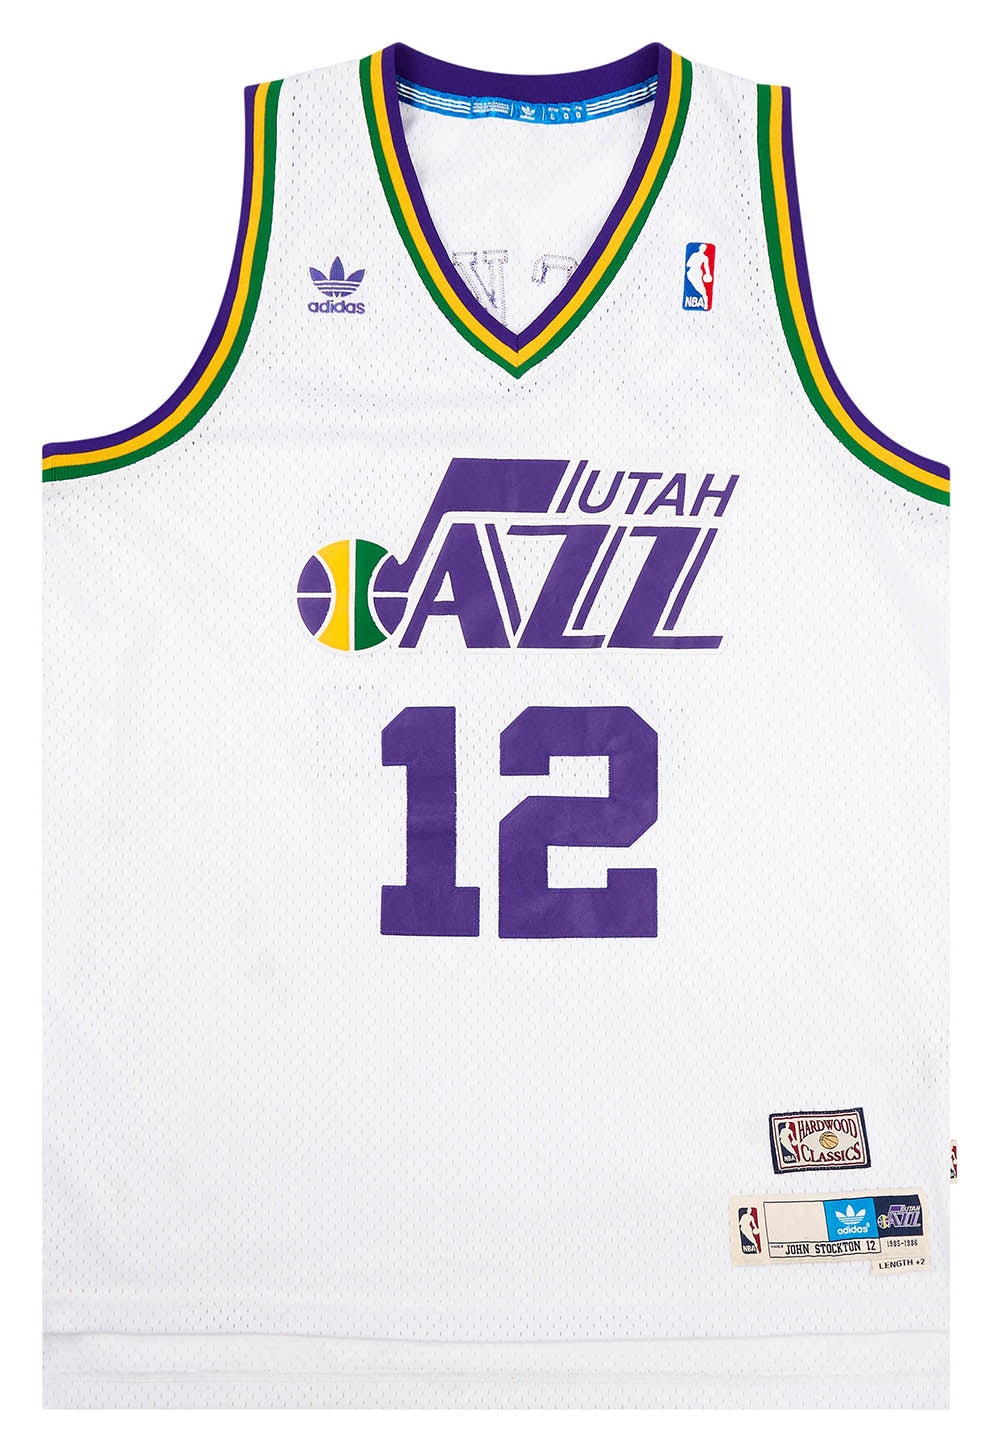 Utah Jazz - 🔥 JC 𝒻𝓁𝒶𝓂𝑒𝓉𝒽𝓇𝑜𝓌𝑒𝓇 T available 𝙉𝙊𝙒 from the